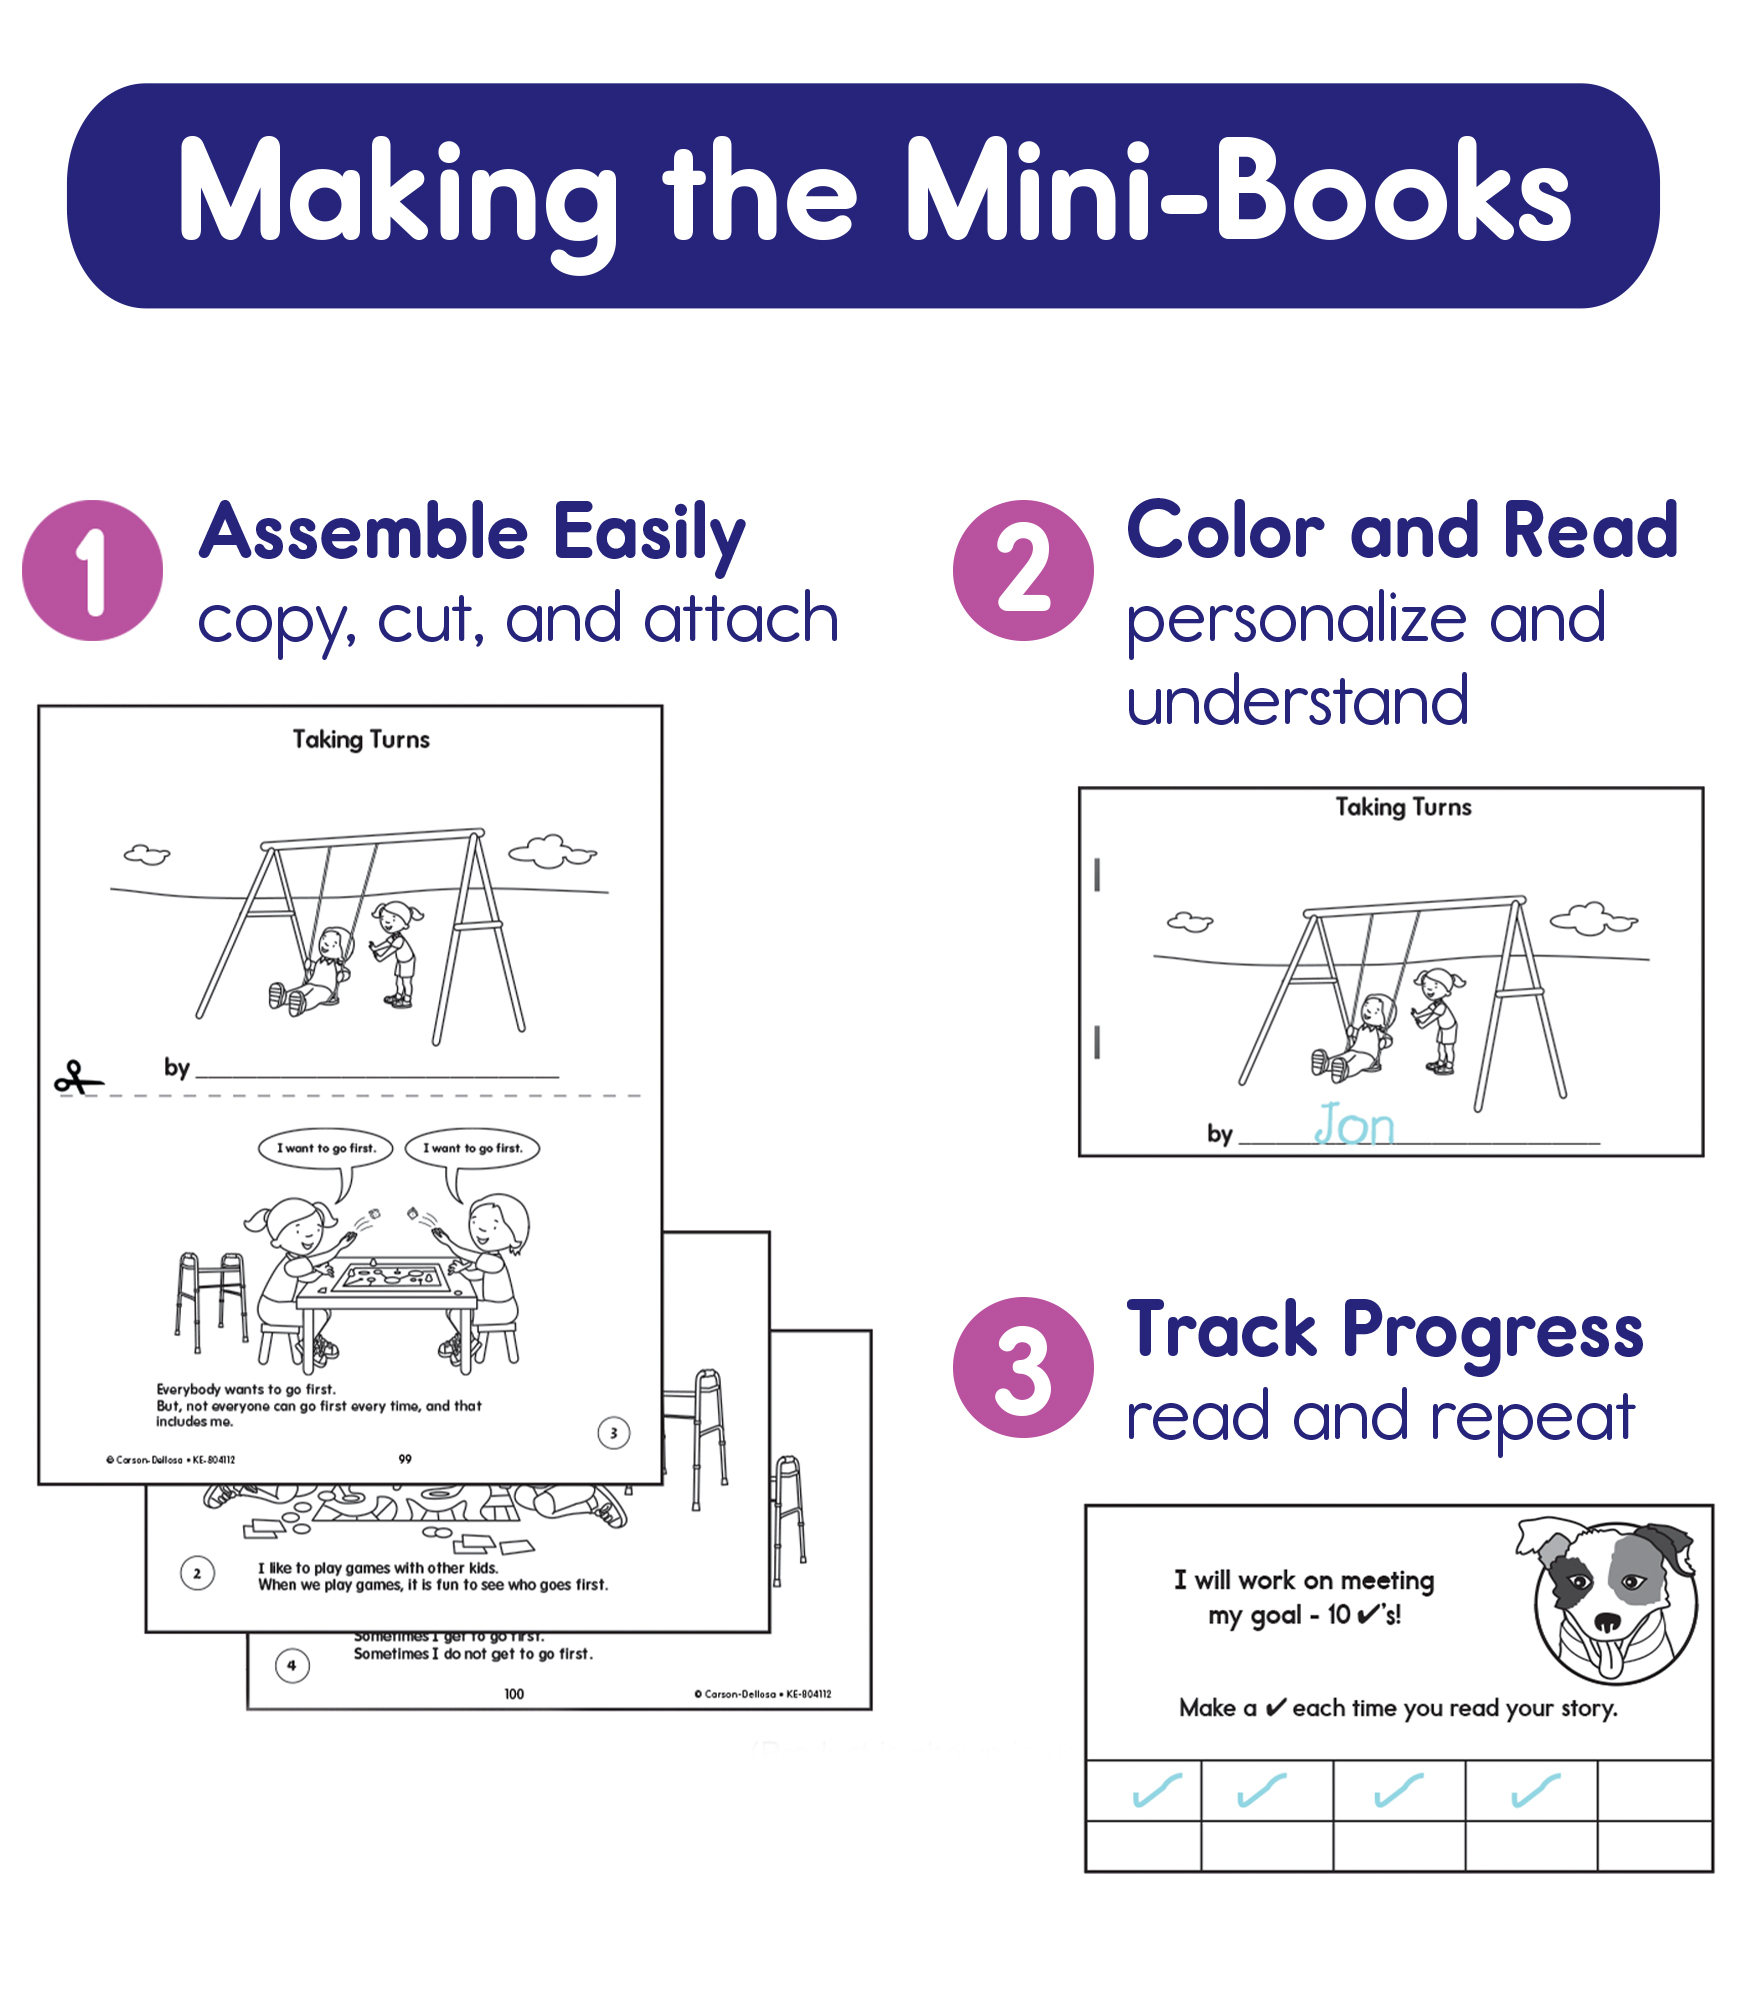 Early Learning Workbooks & Teacher Guides